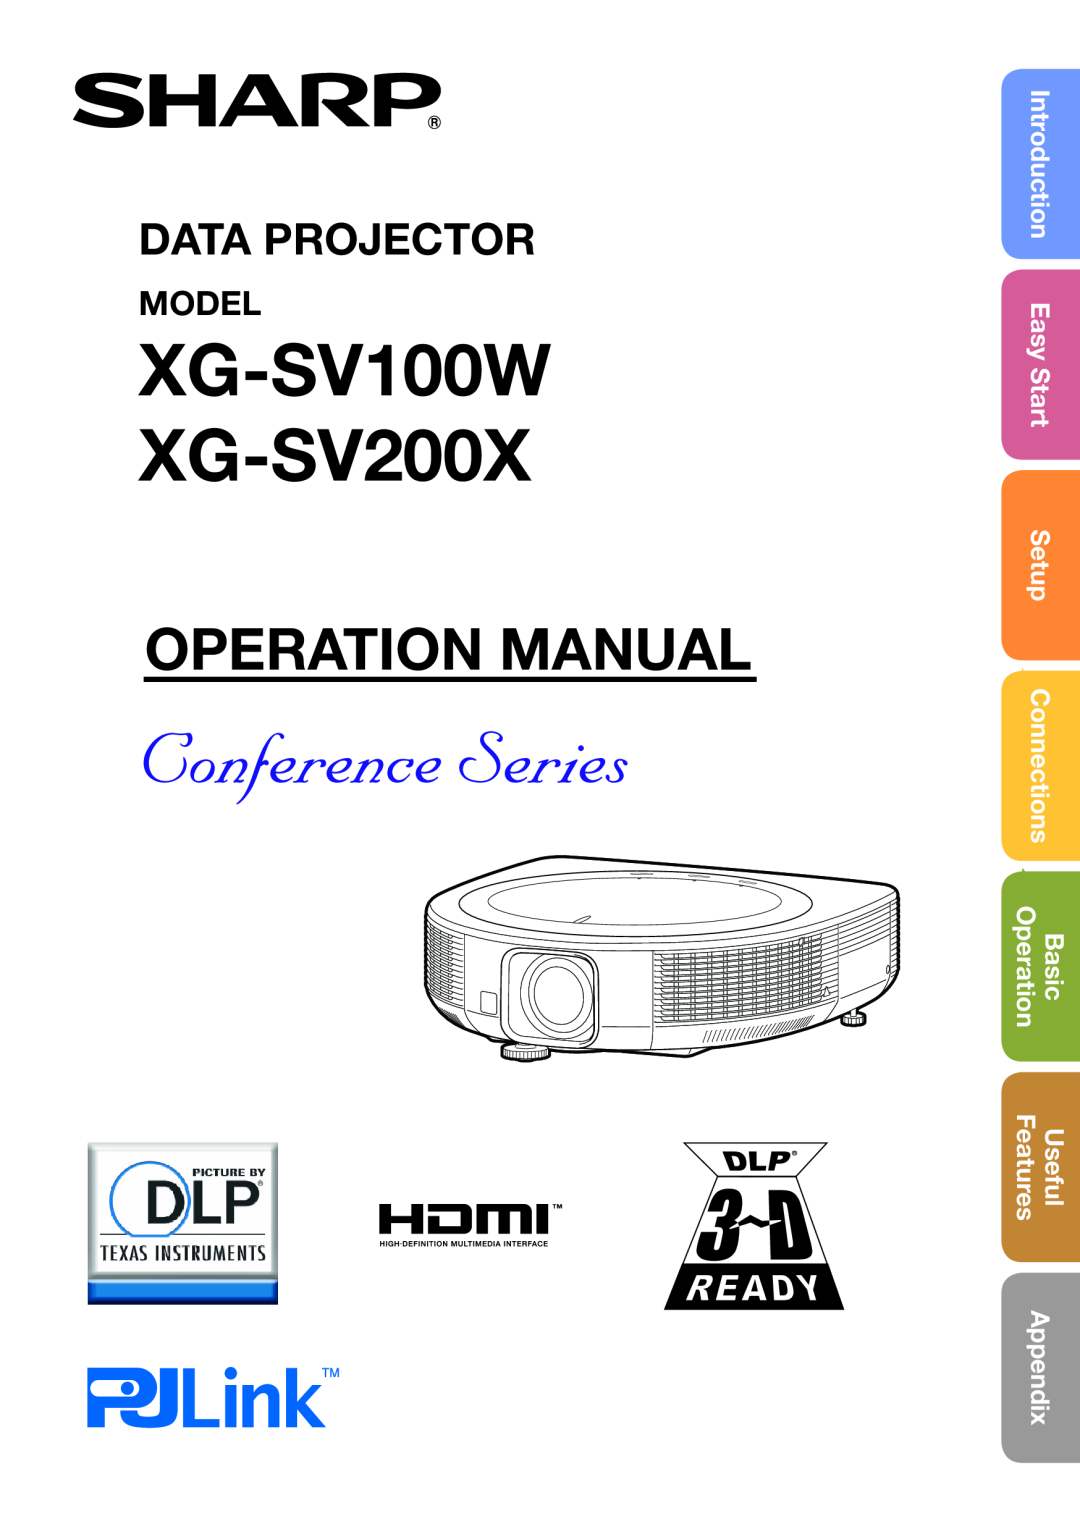 Sharp specifications XG-SV100W XG-SV200X, Setup Manual, Data Projector, Model, Connecting Pin Assignments 